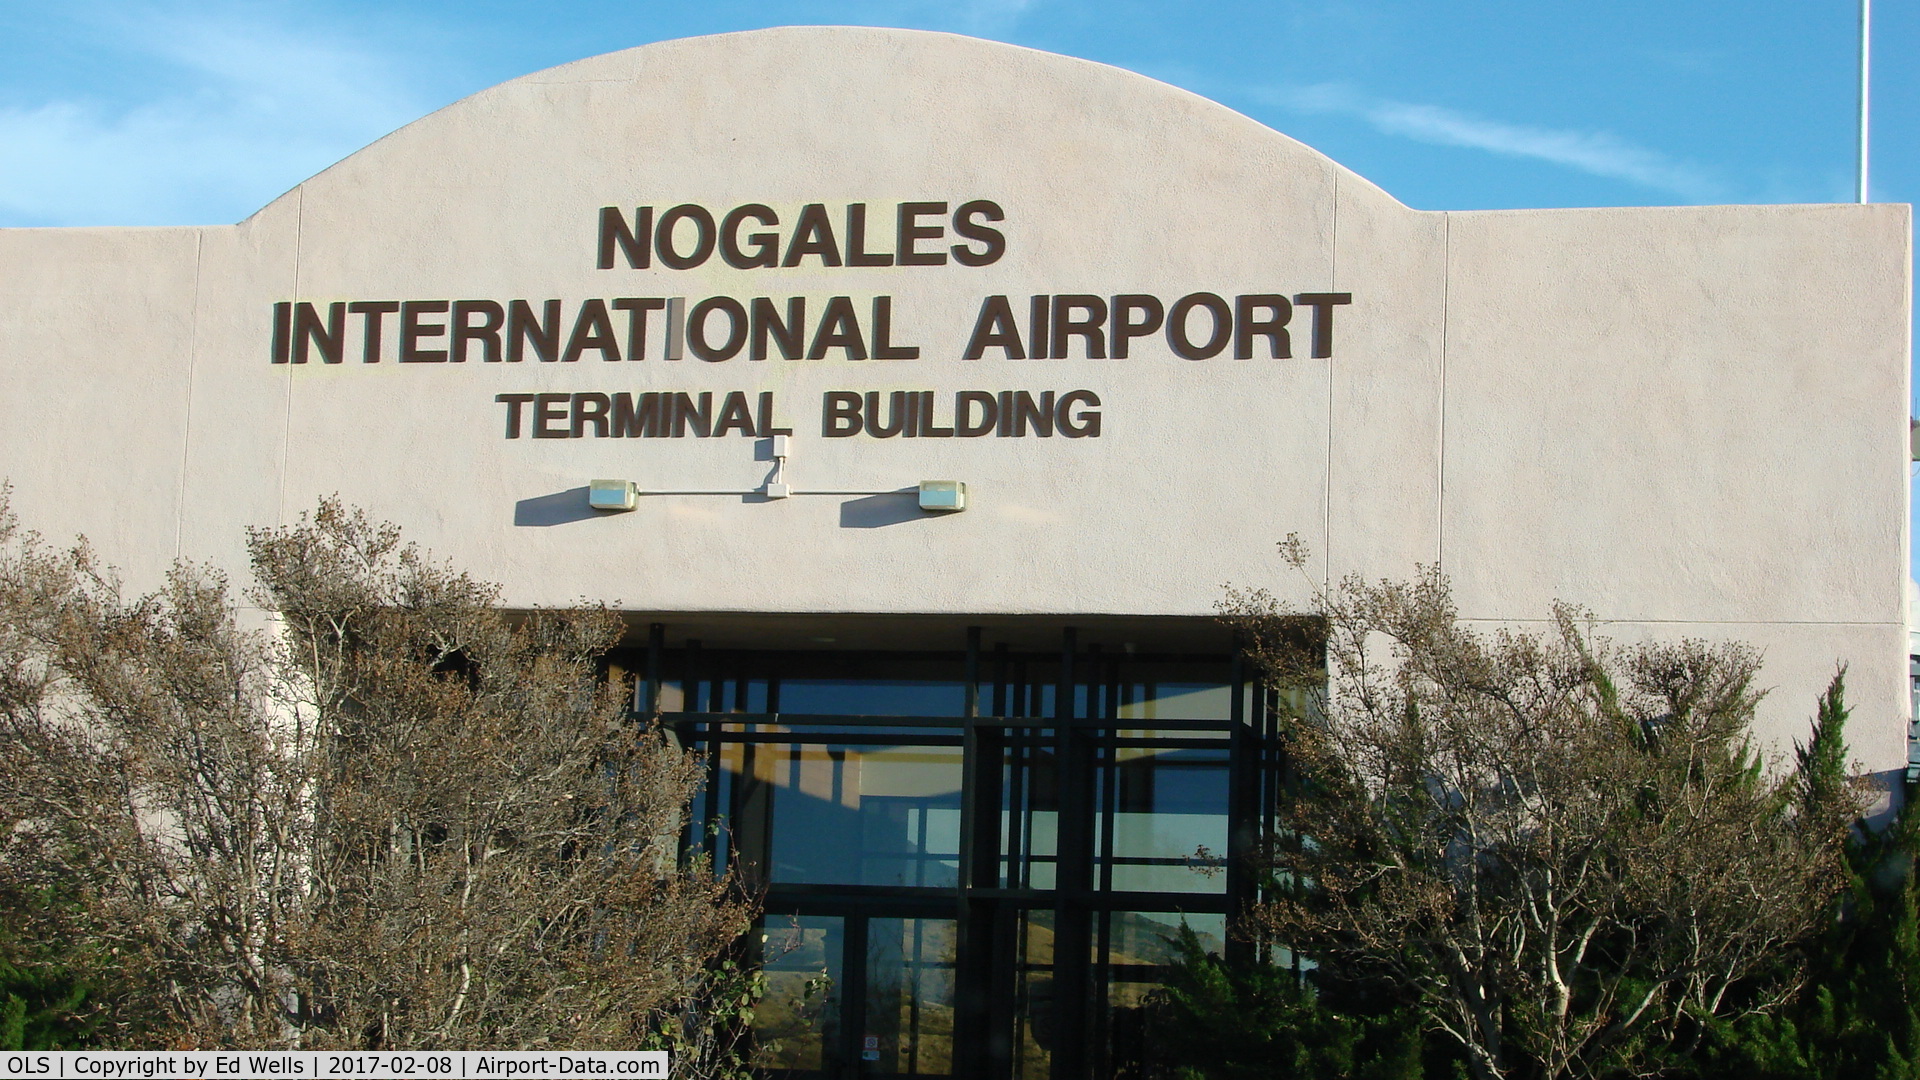 Nogales International Airport (OLS) - Stopped to look around while on a road trip